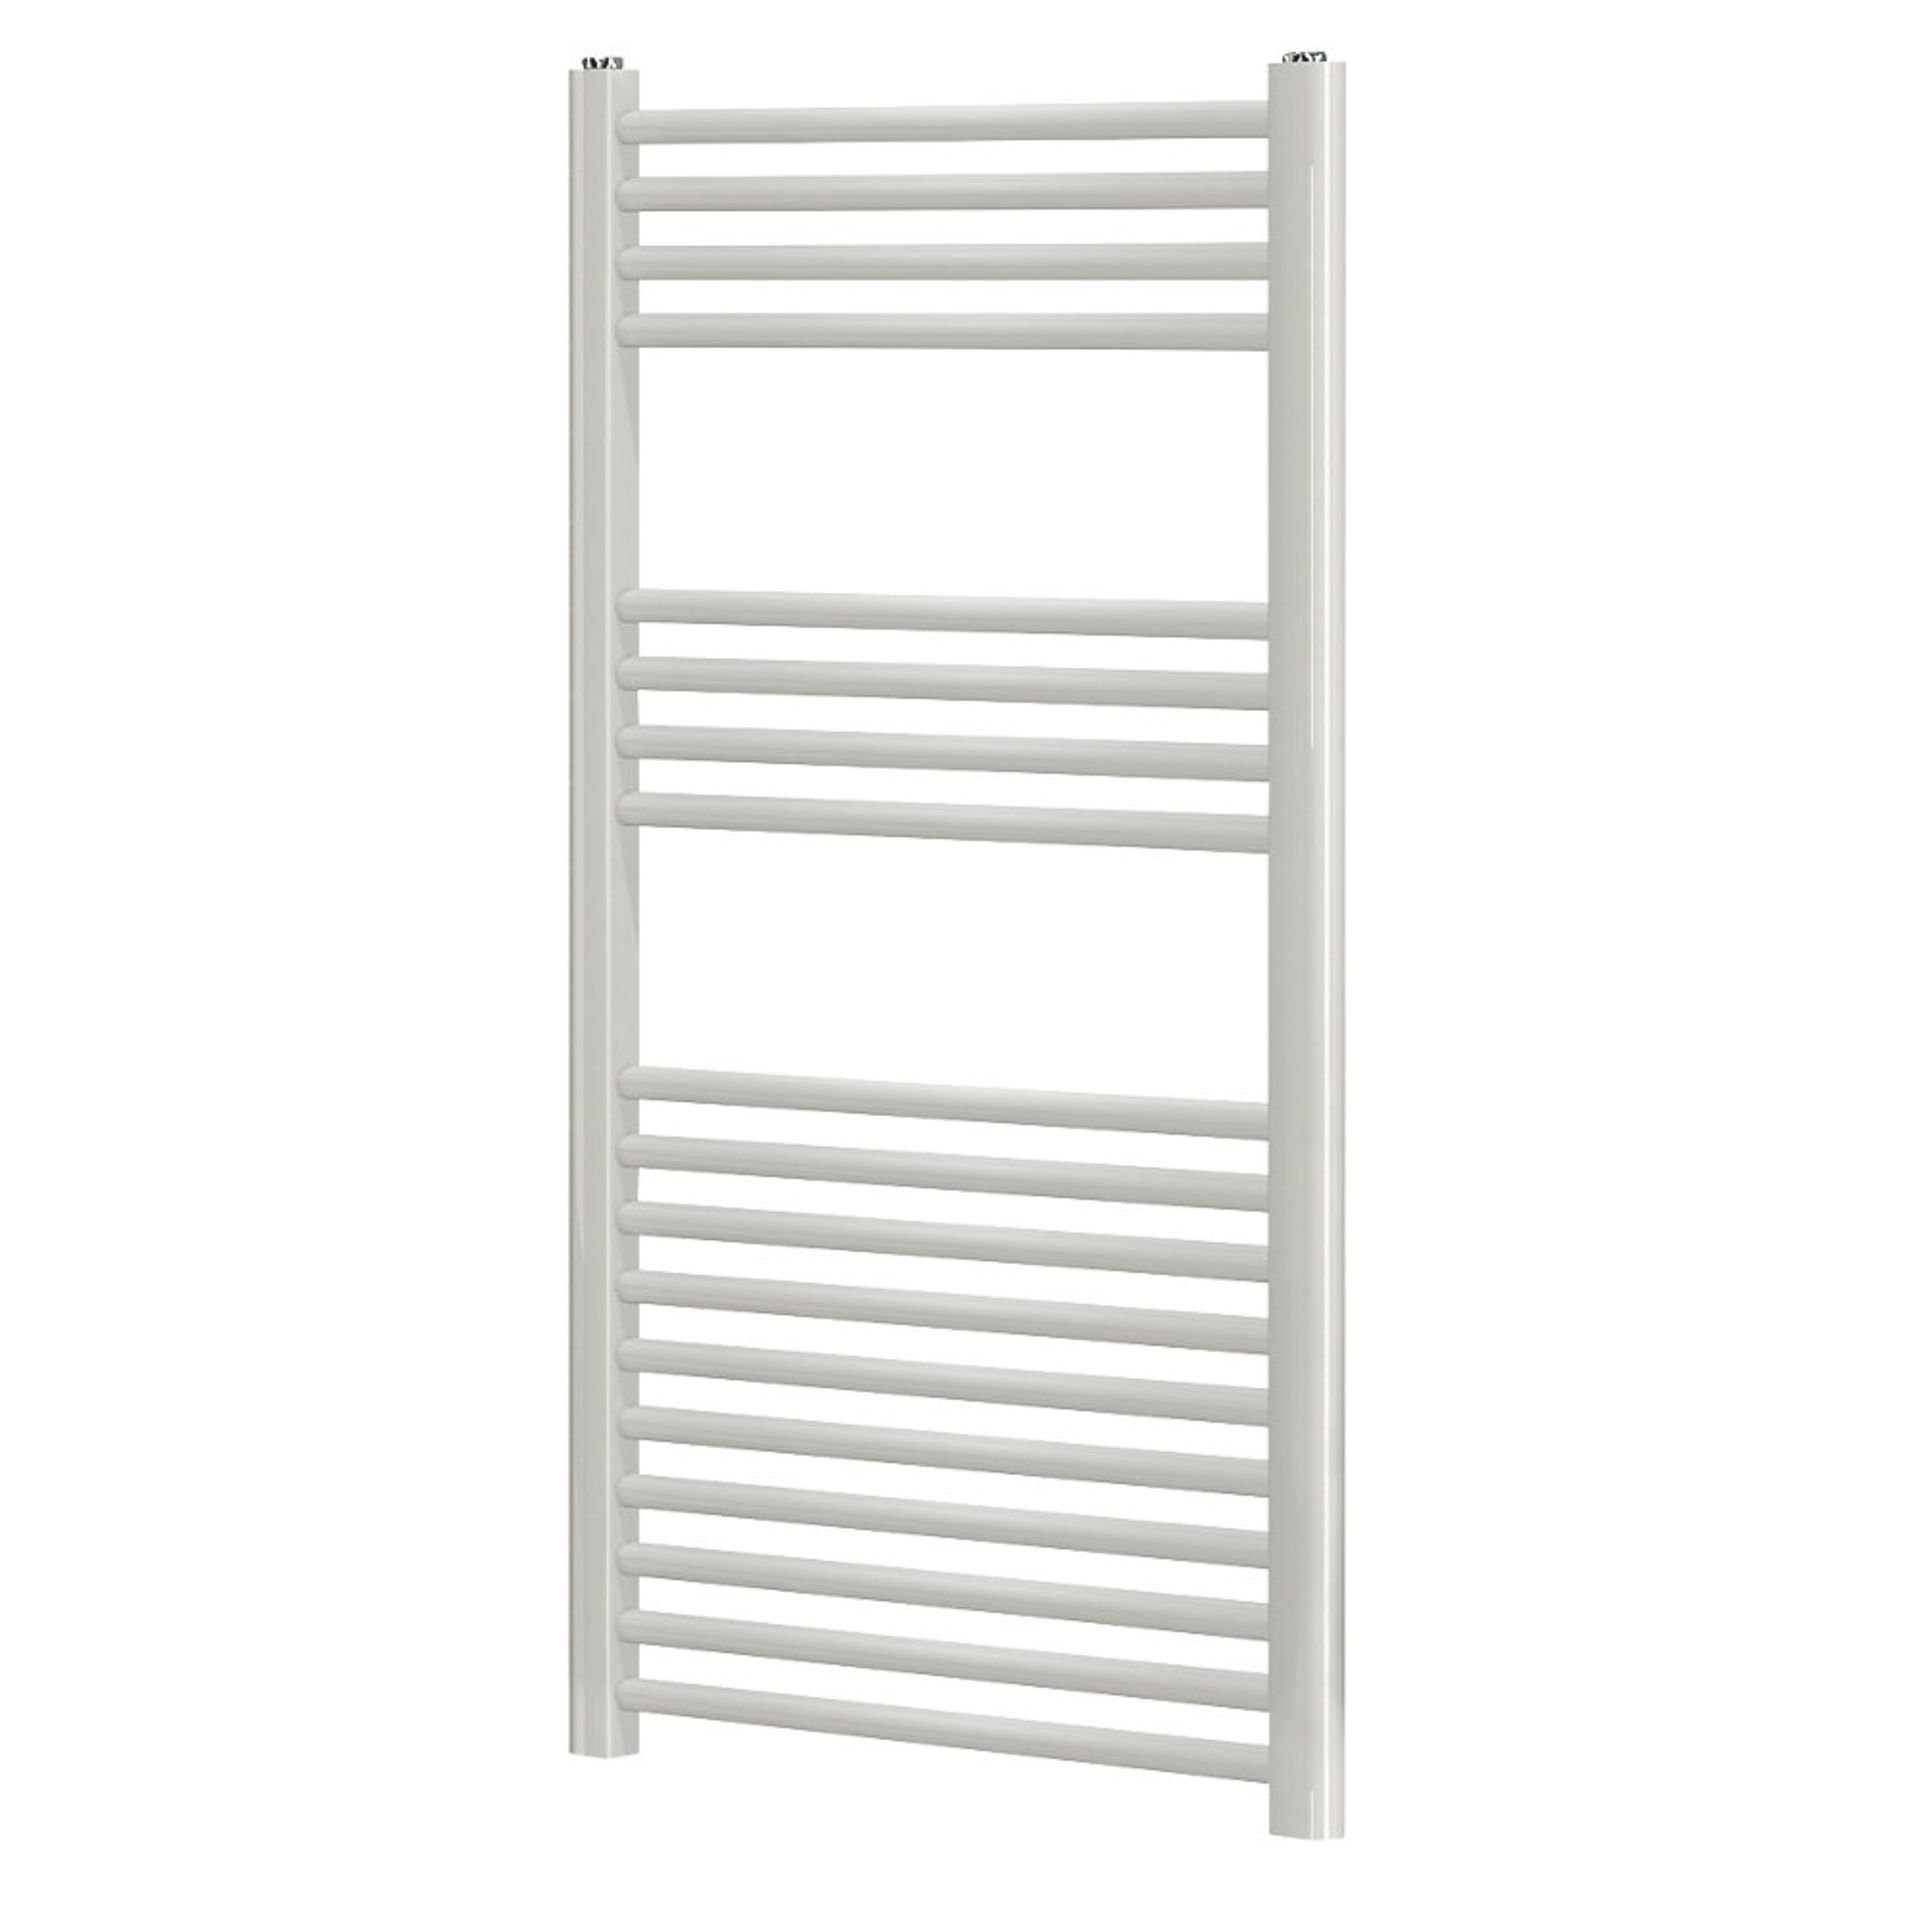 (MC181) 1000 X 450MM TOWEL RADIATOR WHITE. High quality steel construction with powder-coated